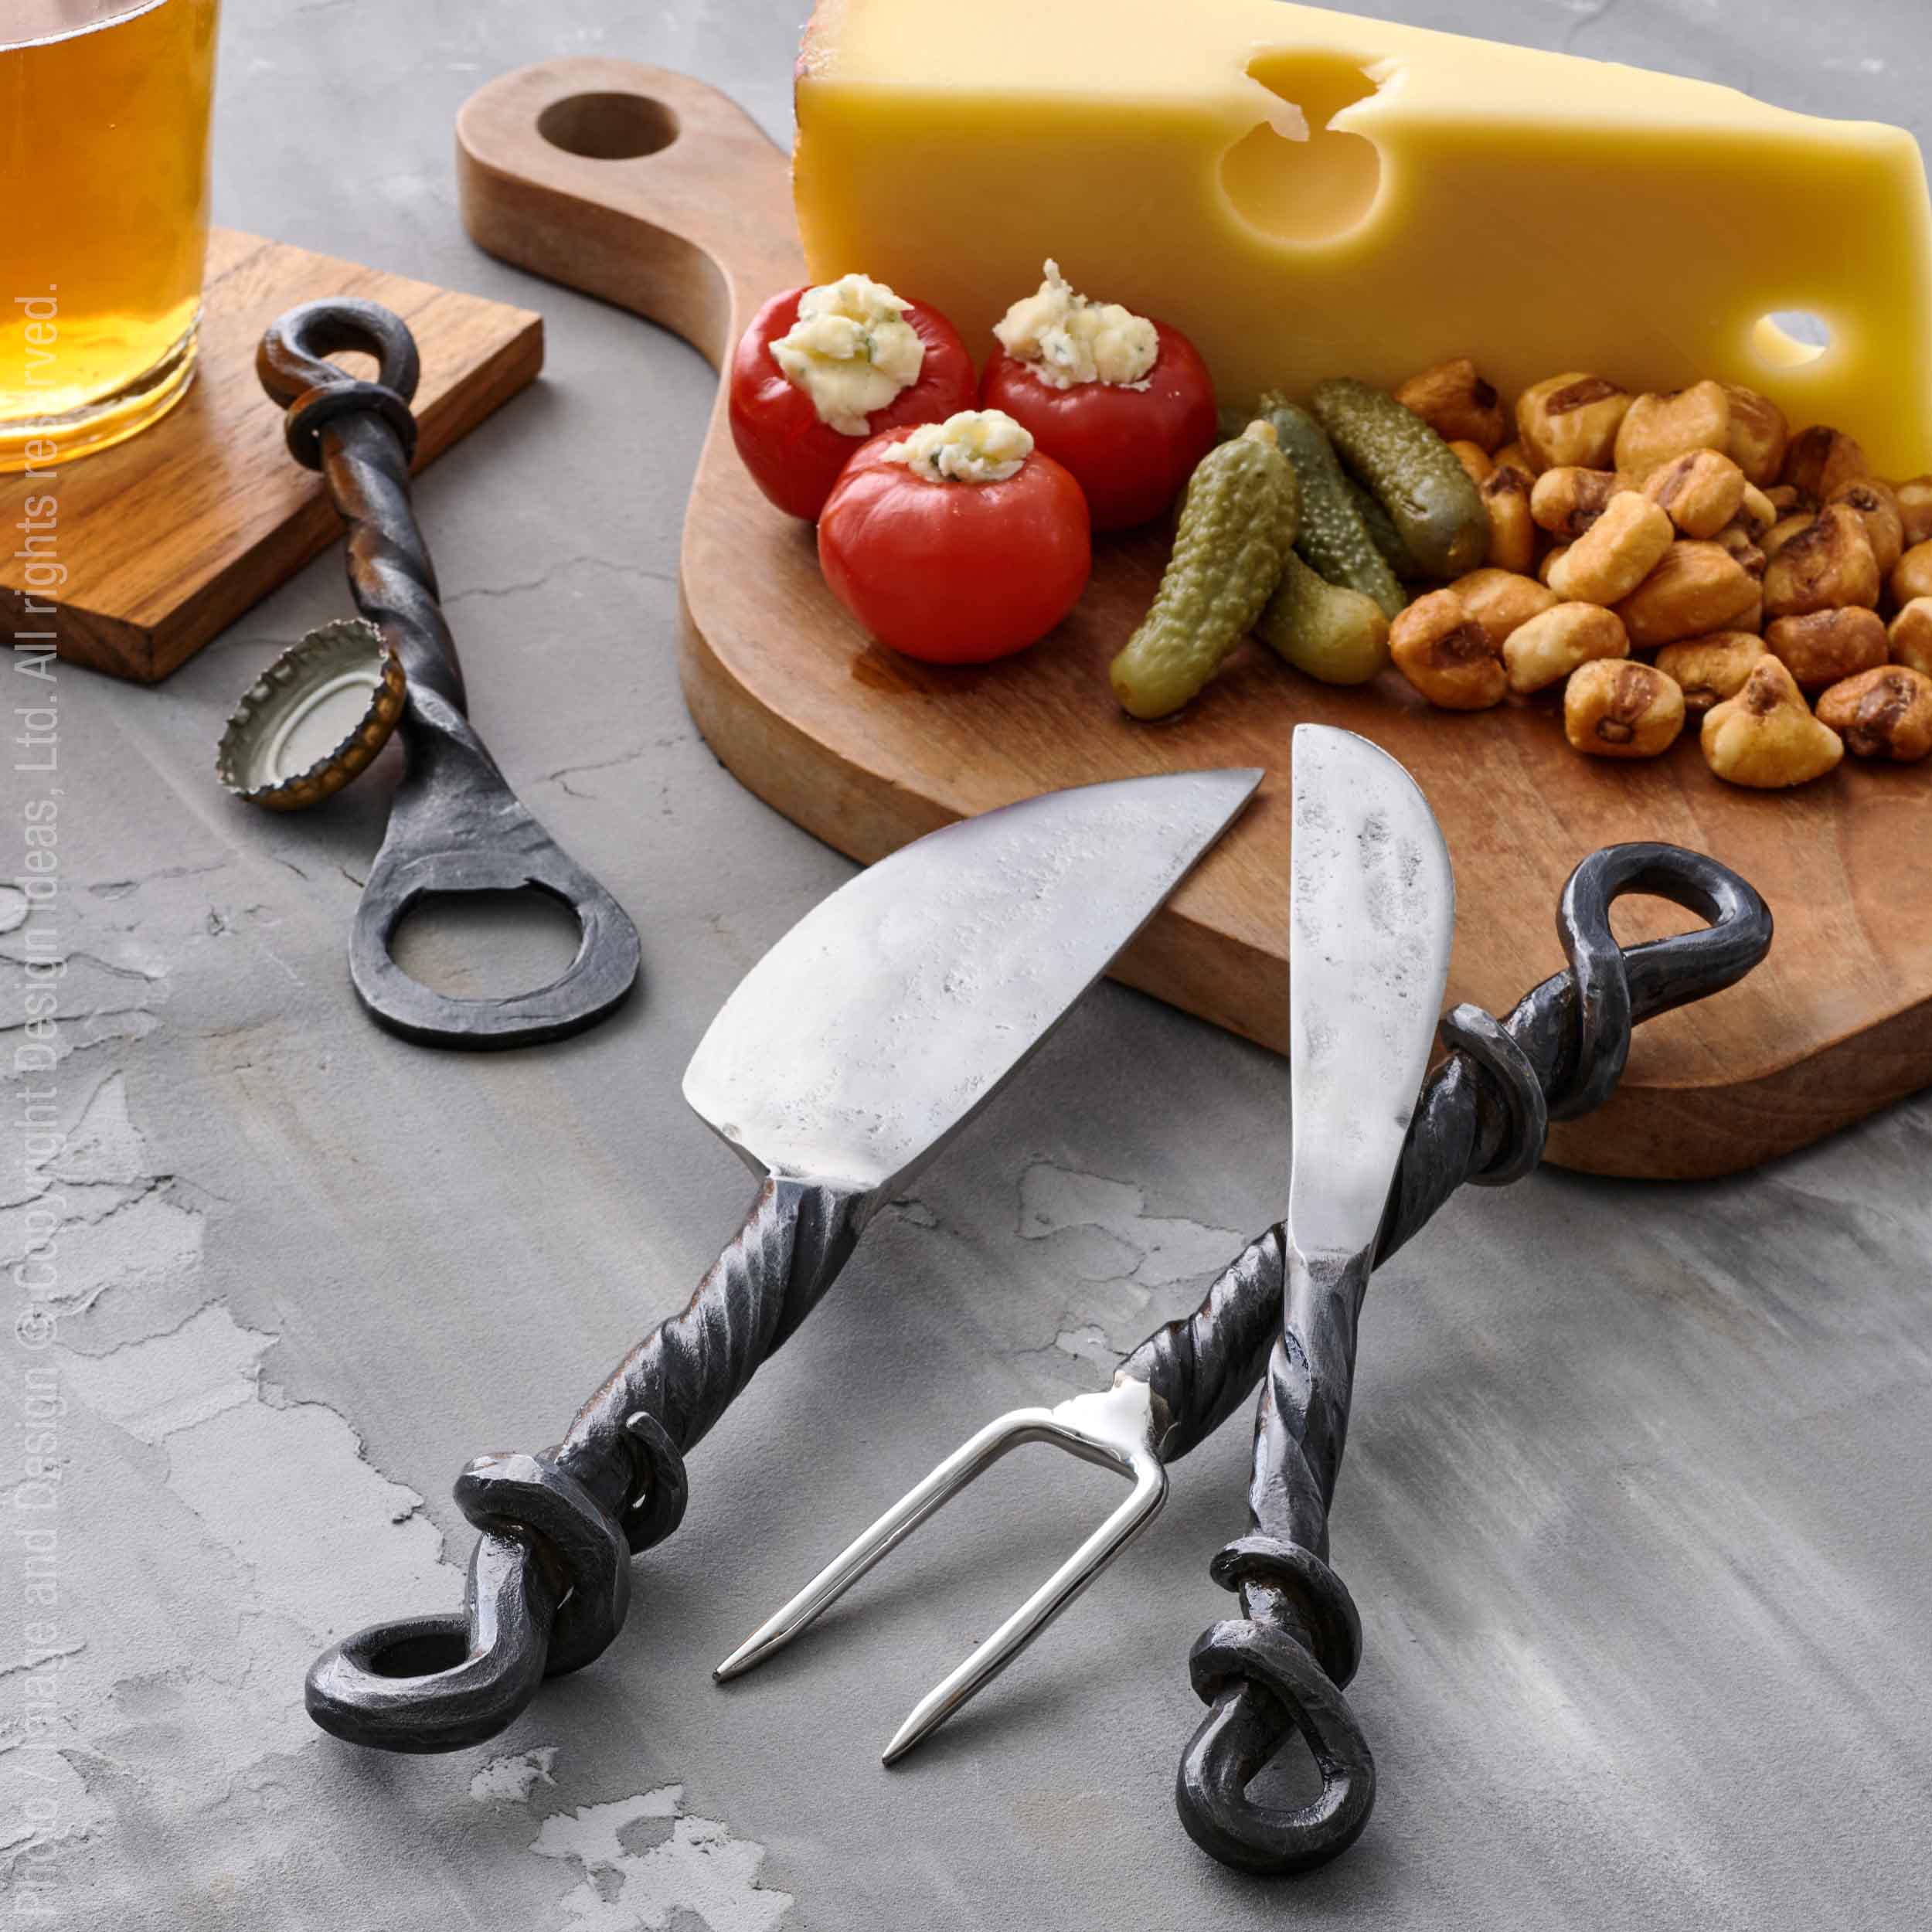 Brummel™ cheese knives - Silver | Image 2 | Premium Utensils from the Brummel collection | made with Stainless Steel for long lasting use | texxture